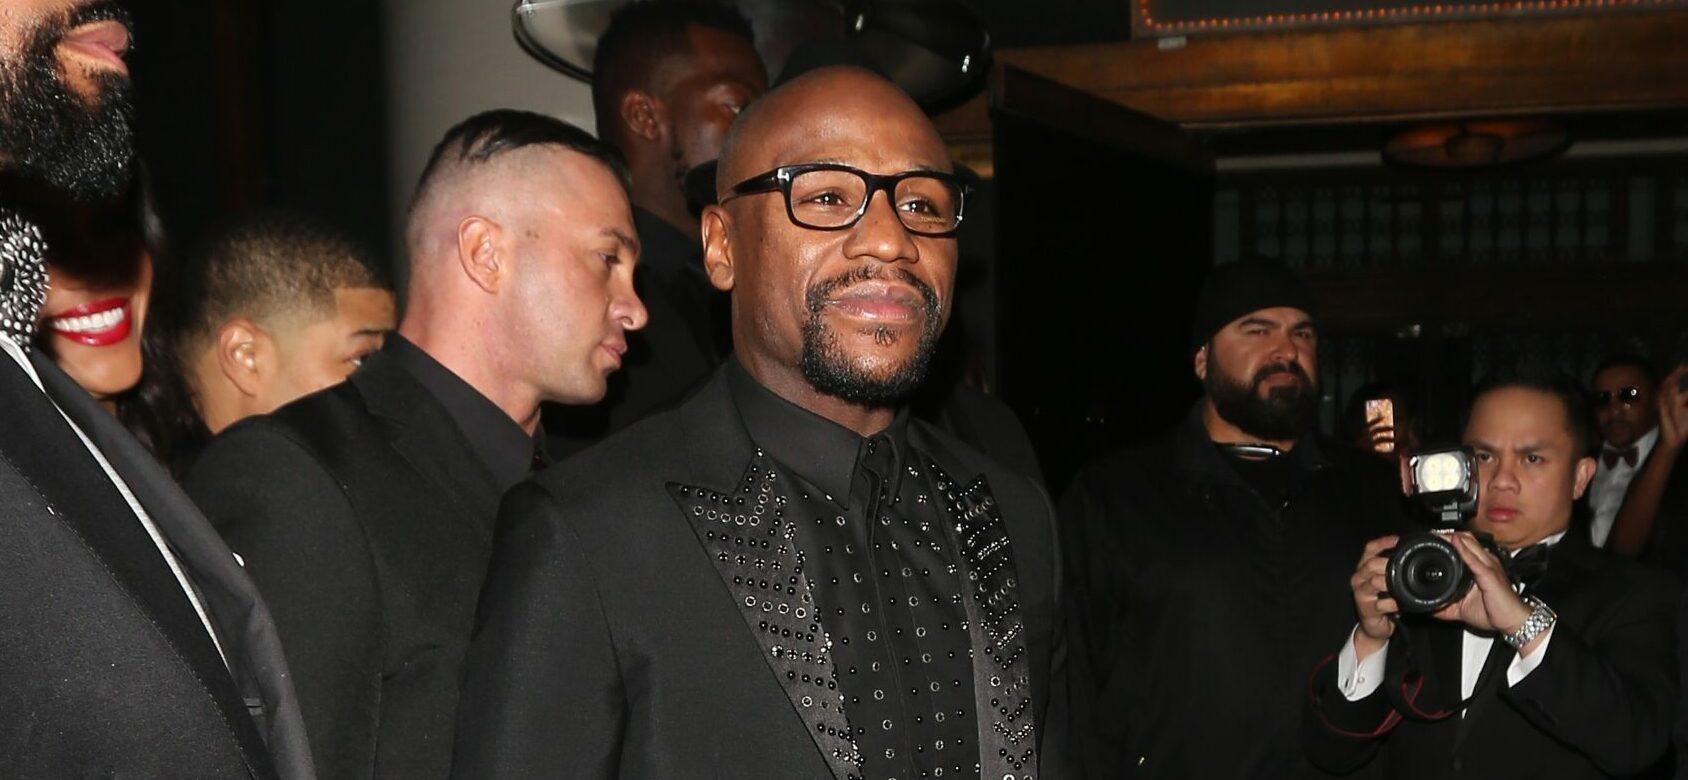 Floyd Mayweather Protests Accepting Gifts On Christmas & Birthdays: ‘I’m Better Than That’